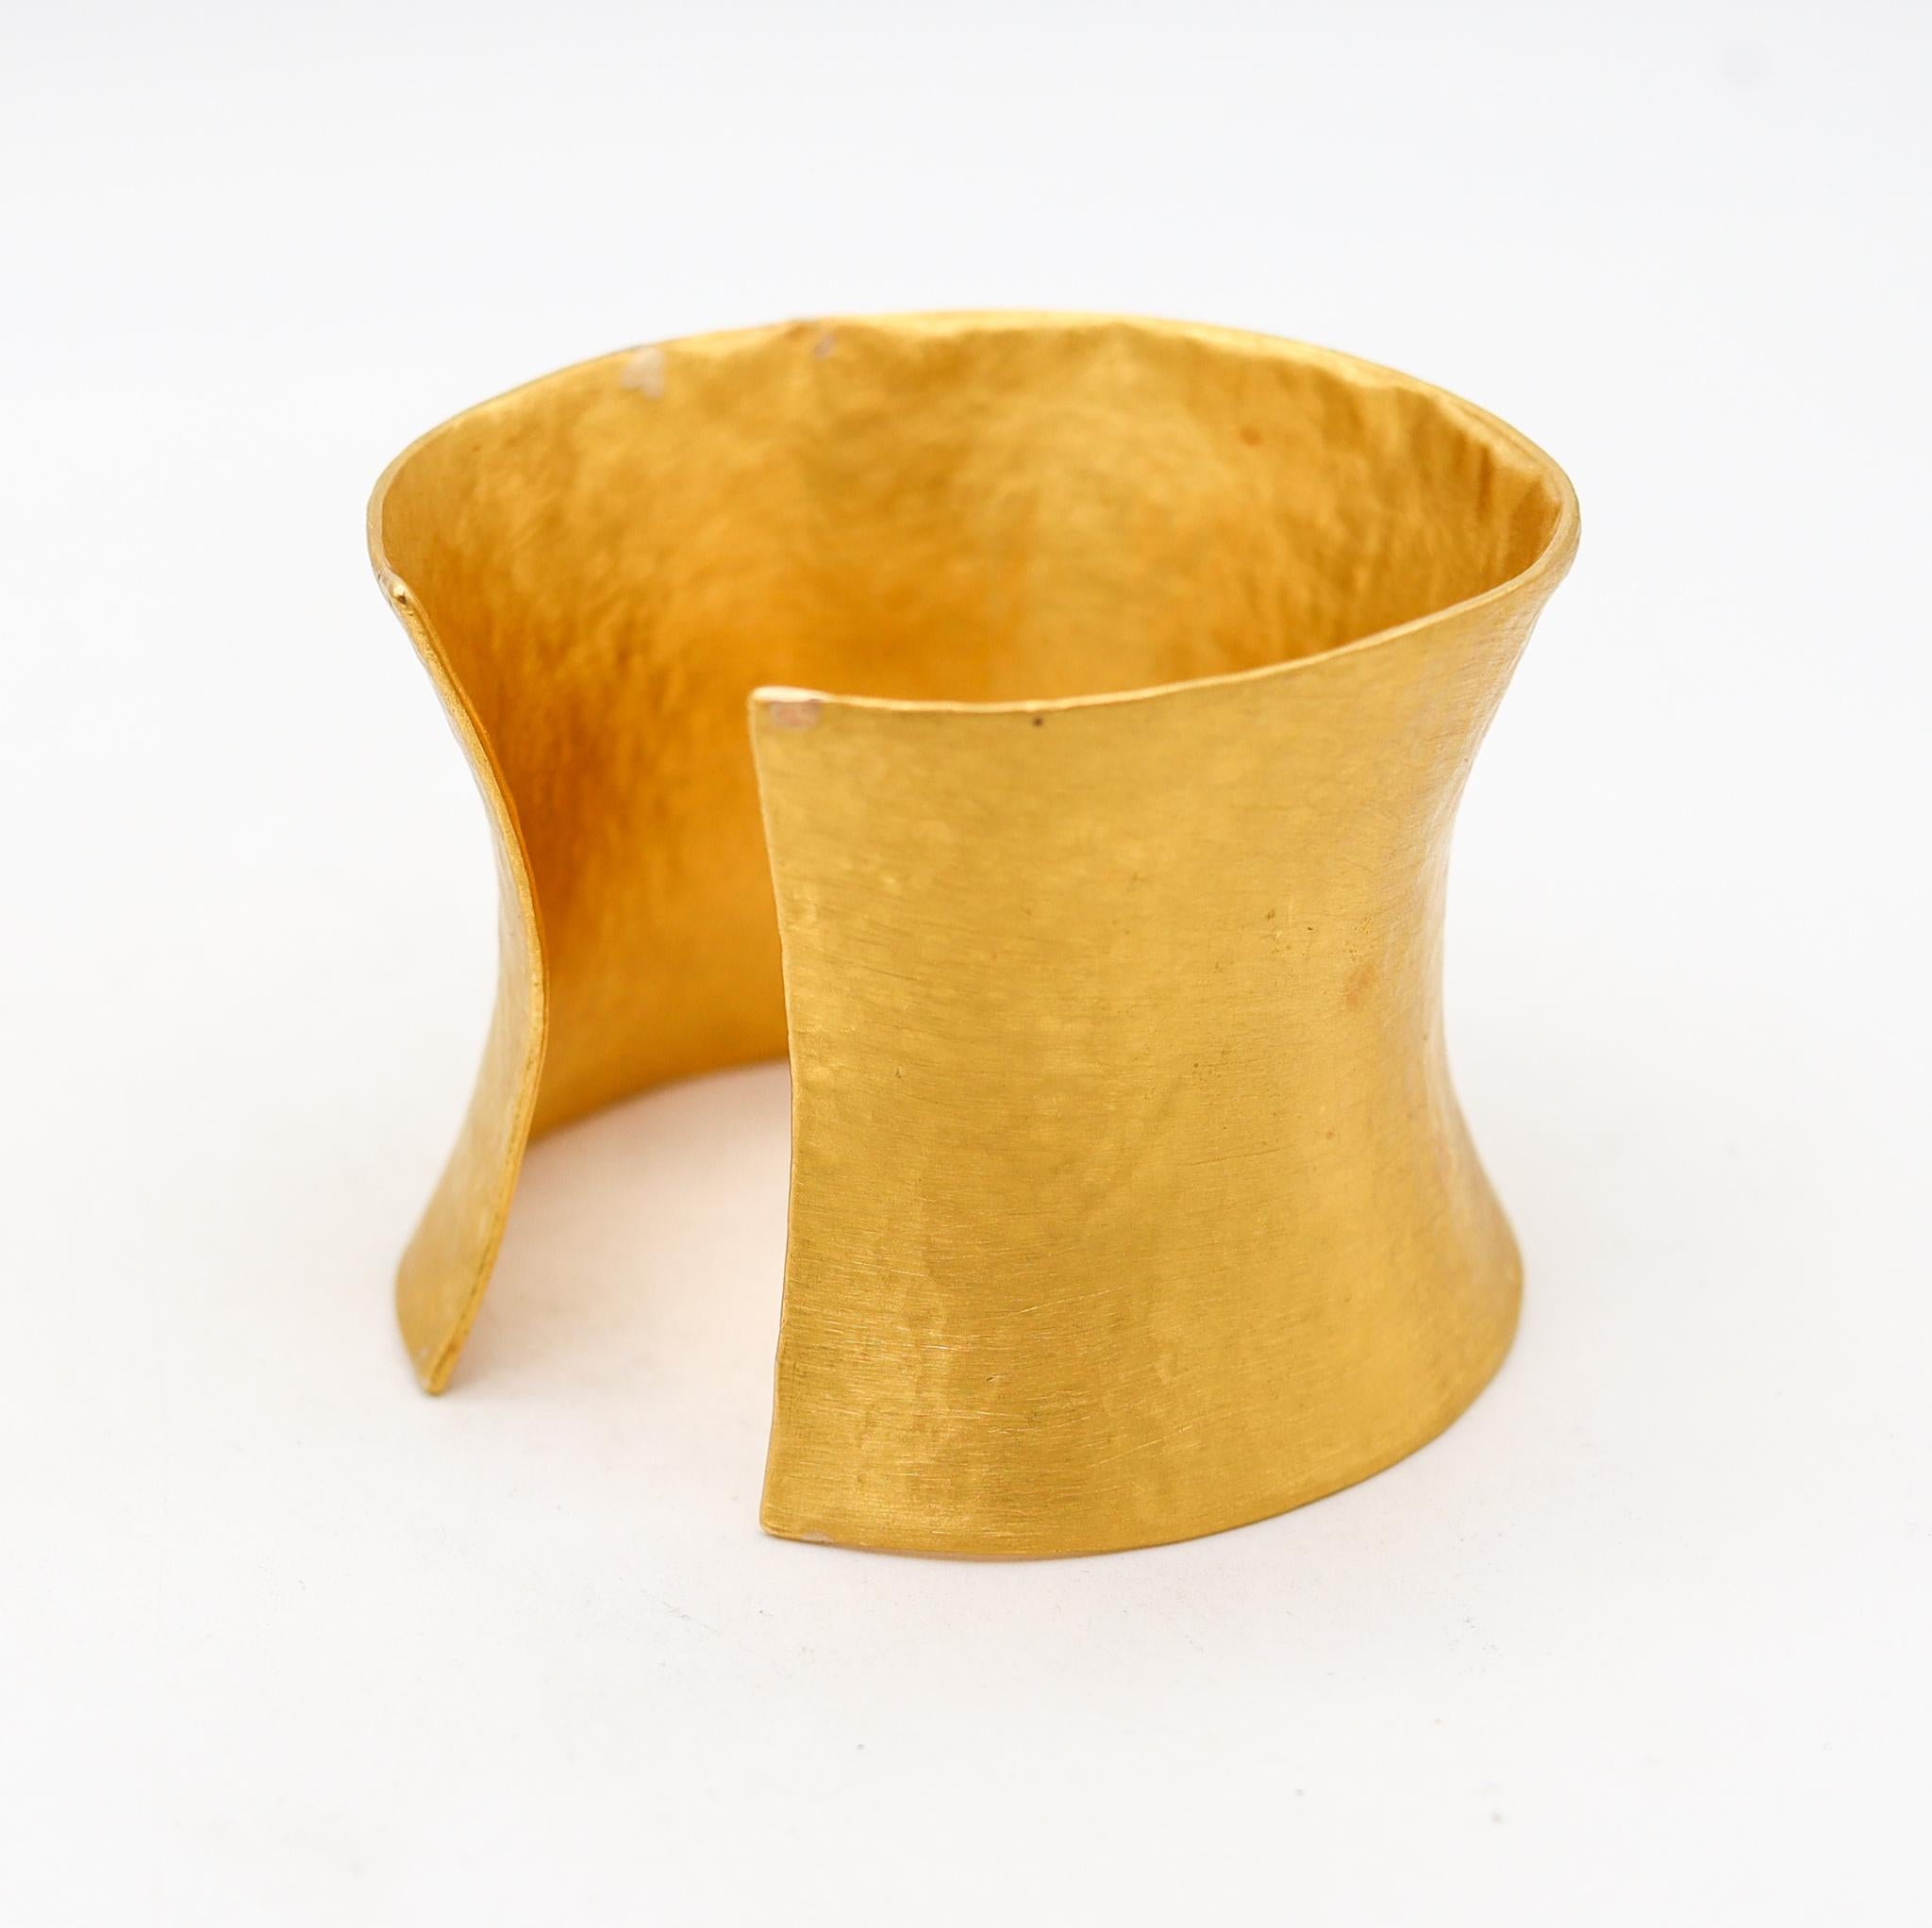 Etruscan Revival Yossi Harari Bold Hammered Roxanne Corset Cuff Bracelet in Solid 24Kt Gold